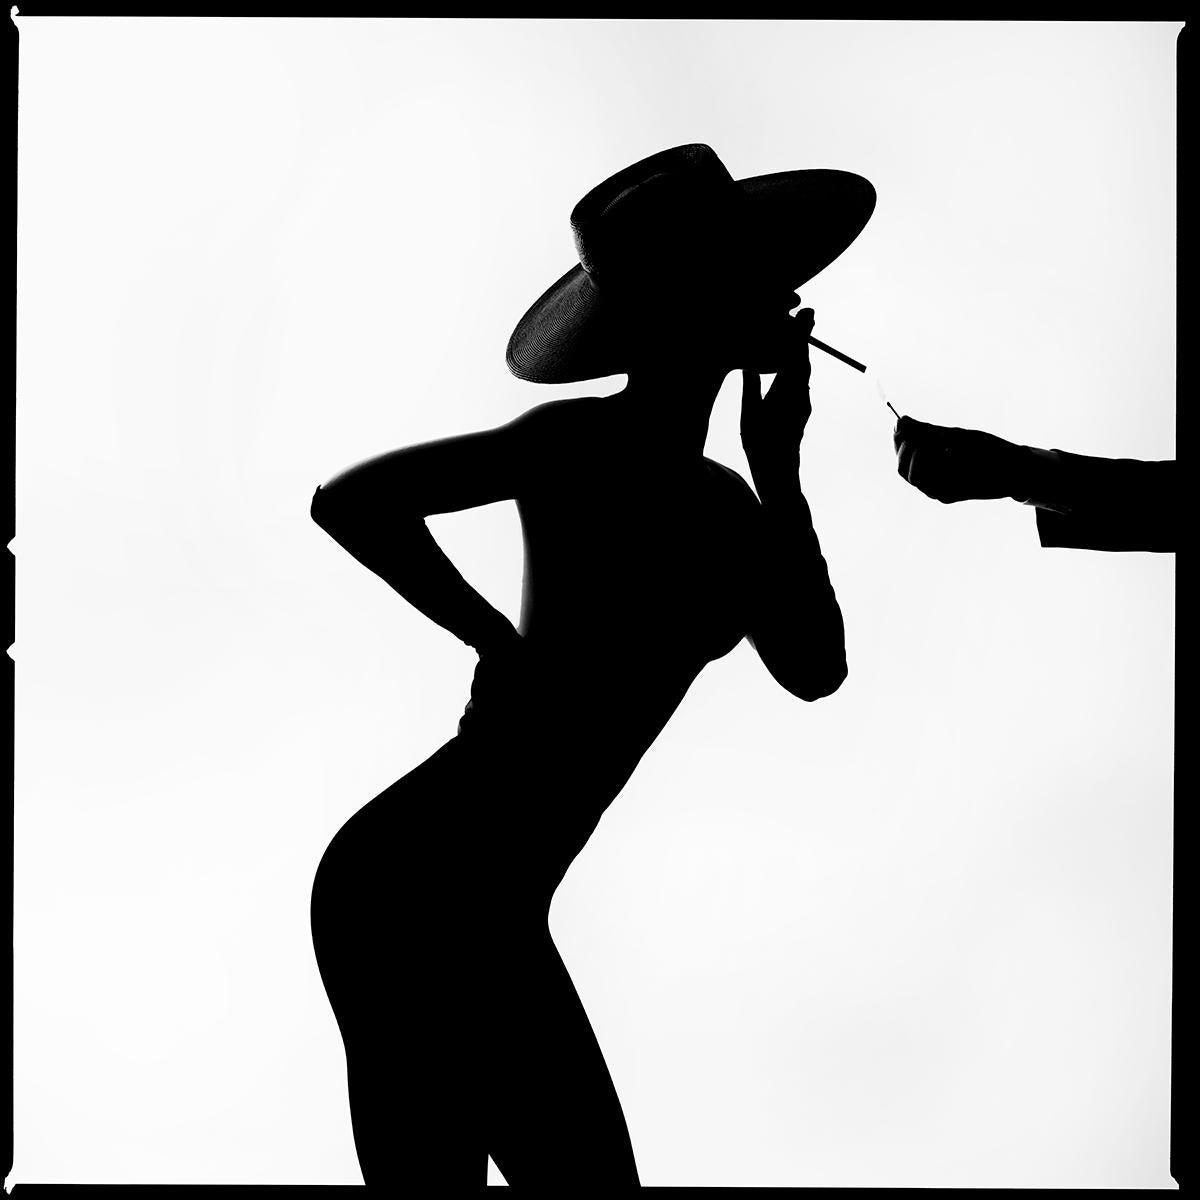 Tyler Shields - Match Silhouette, Photography 2020, Printed After